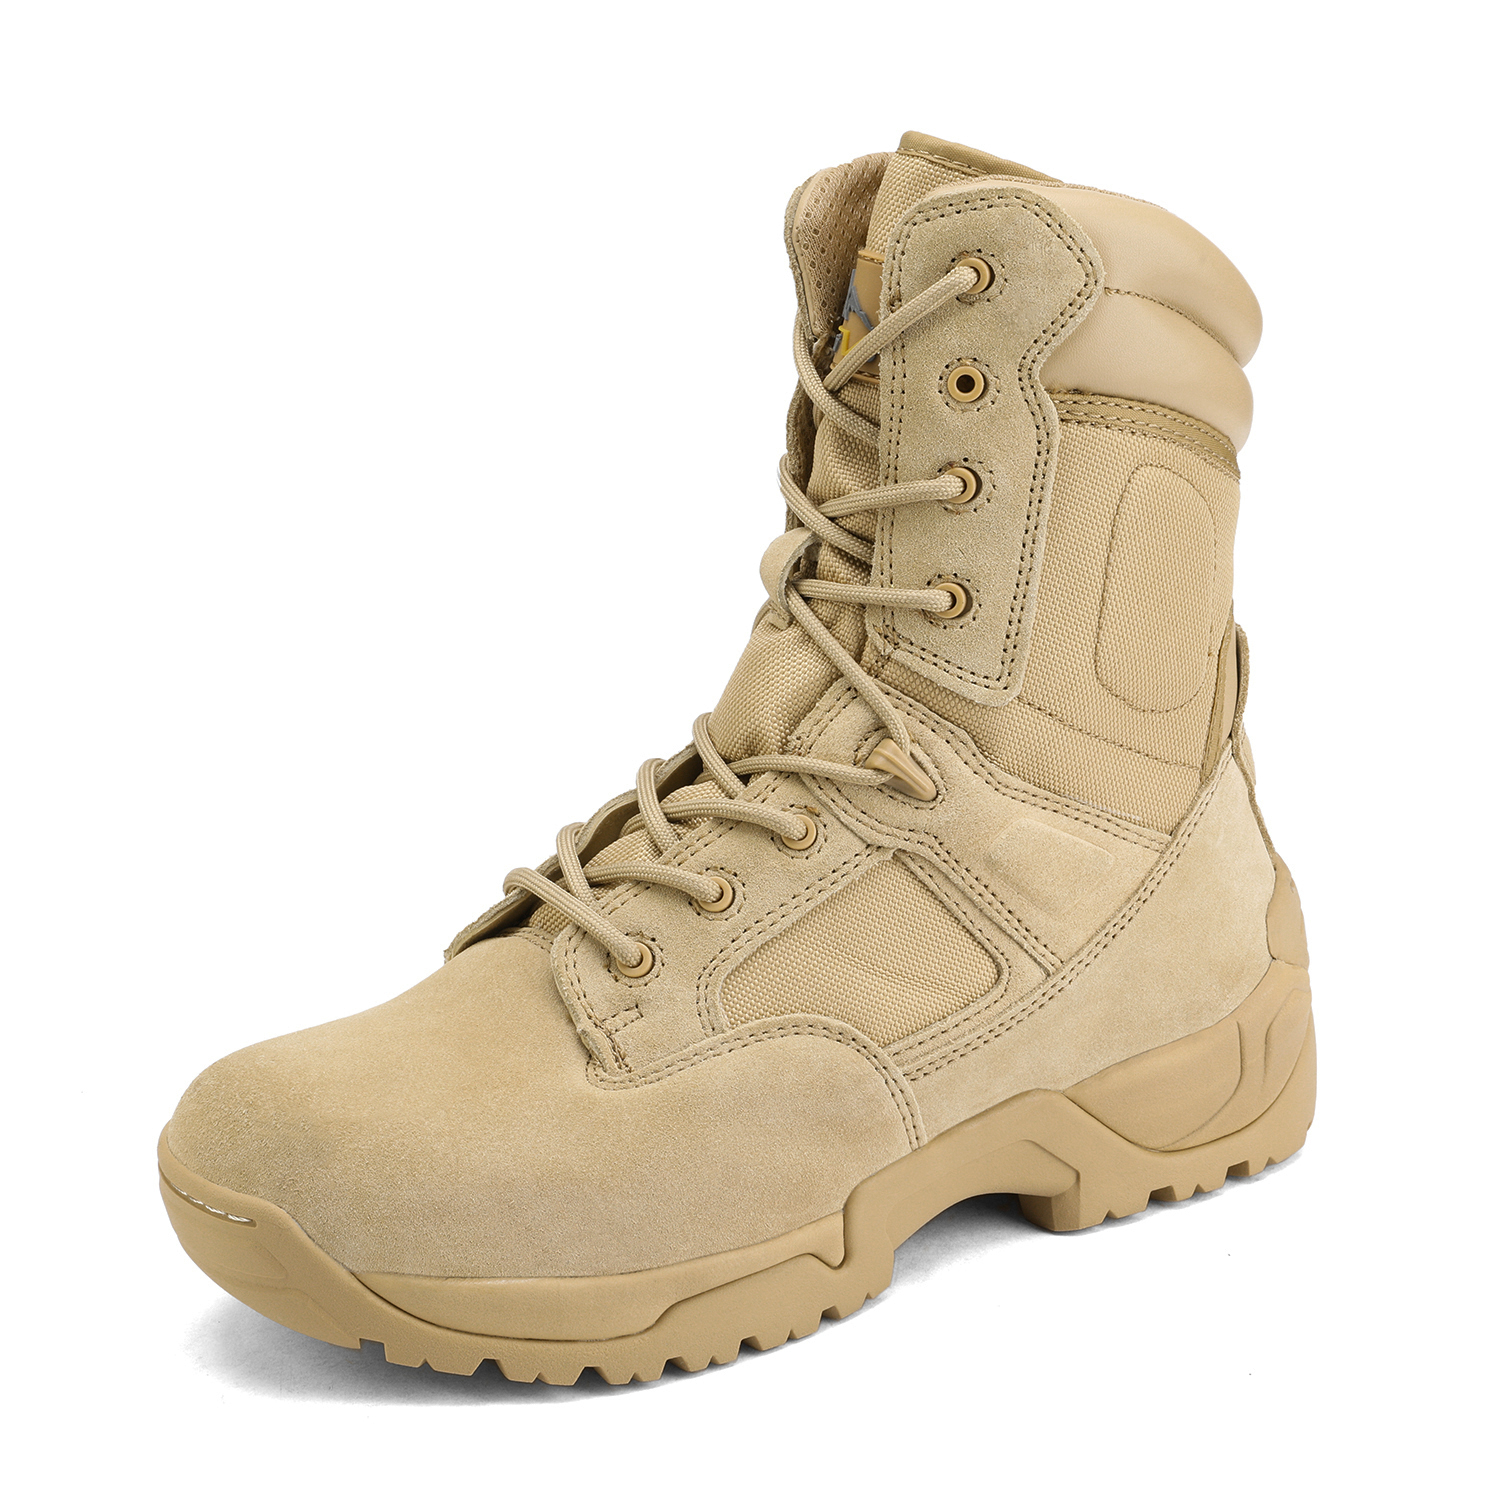 NORTIV 8 Men's Military Tactical Work Boots Hiking Motorcycle Combat Boots - image 1 of 5